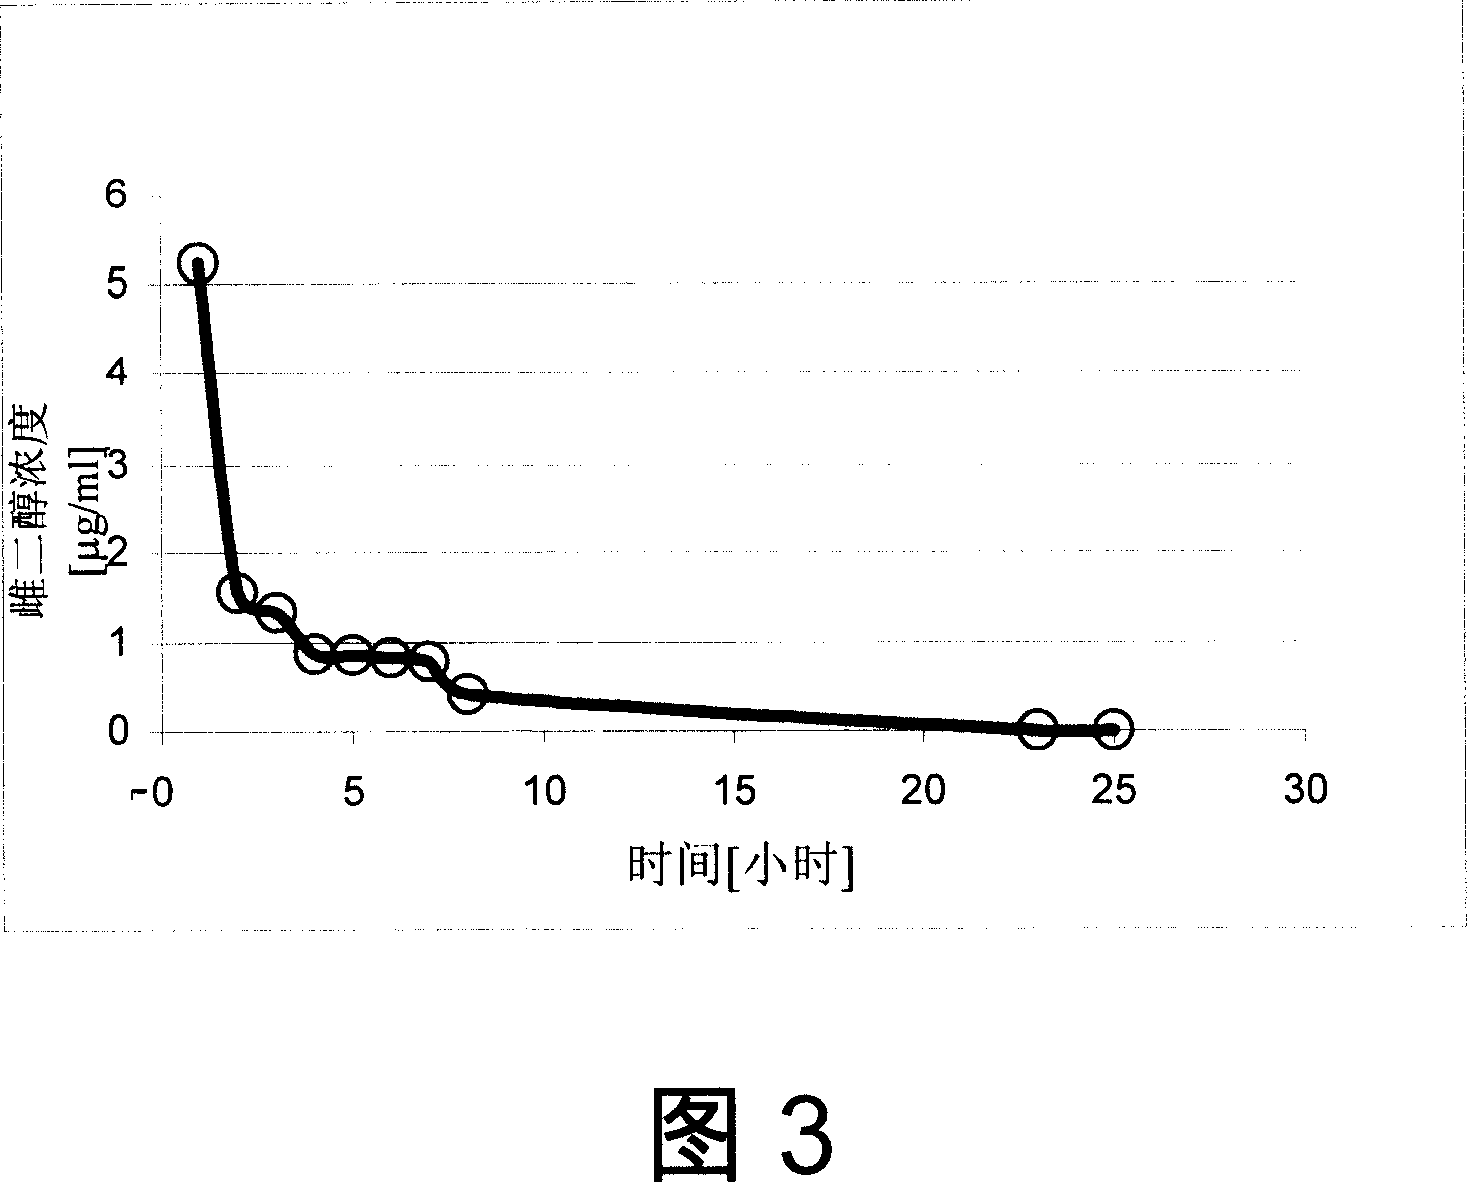 Biocompatible coating, method, and use of medical surfaces